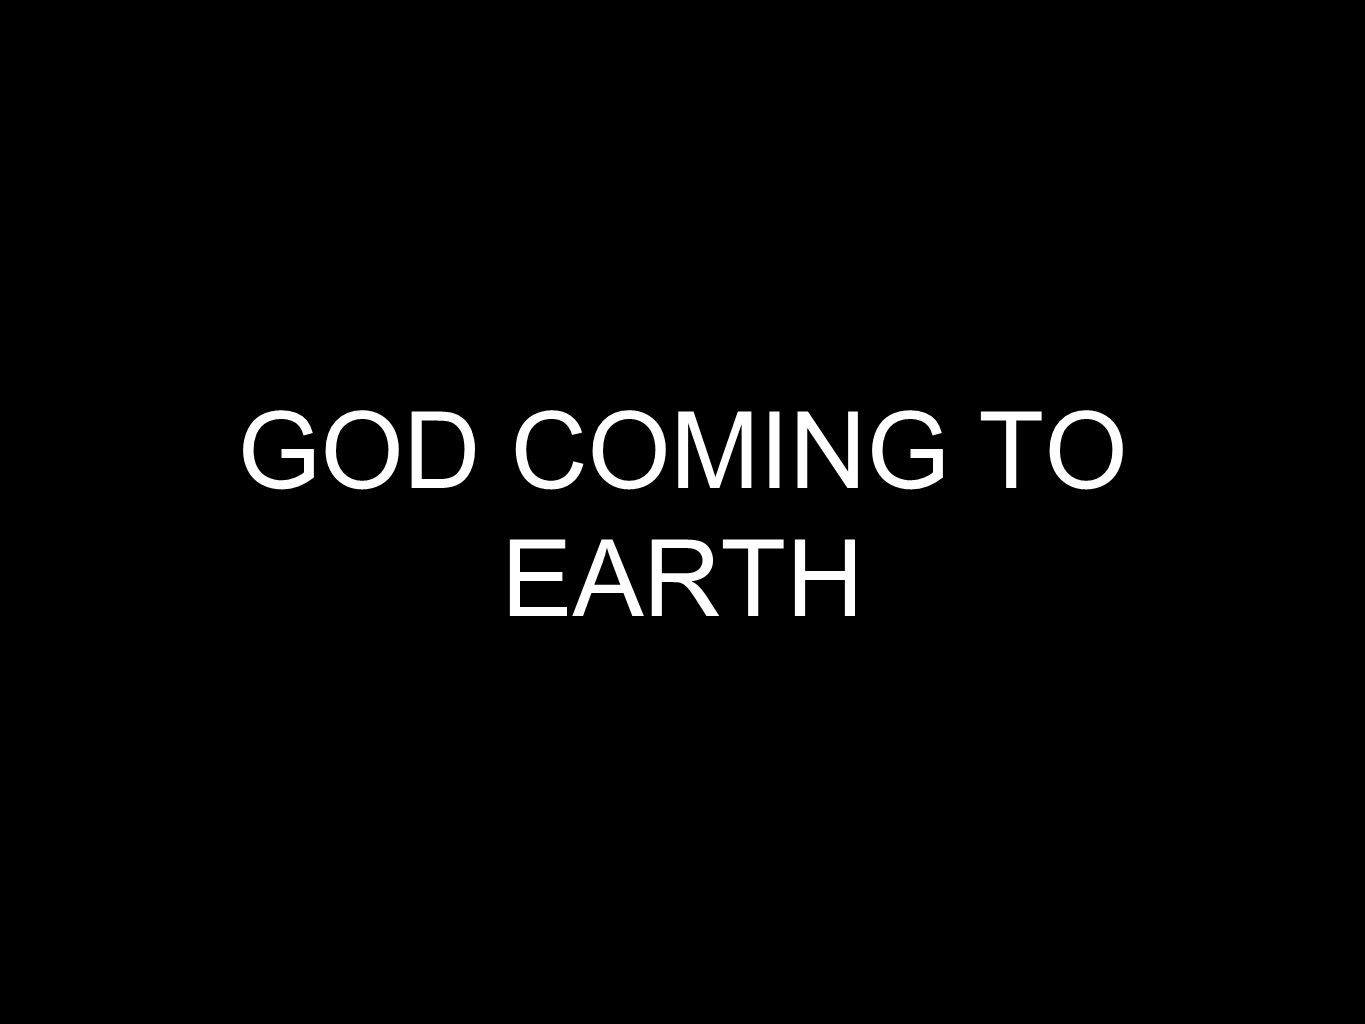 GOD COMING TO EARTH